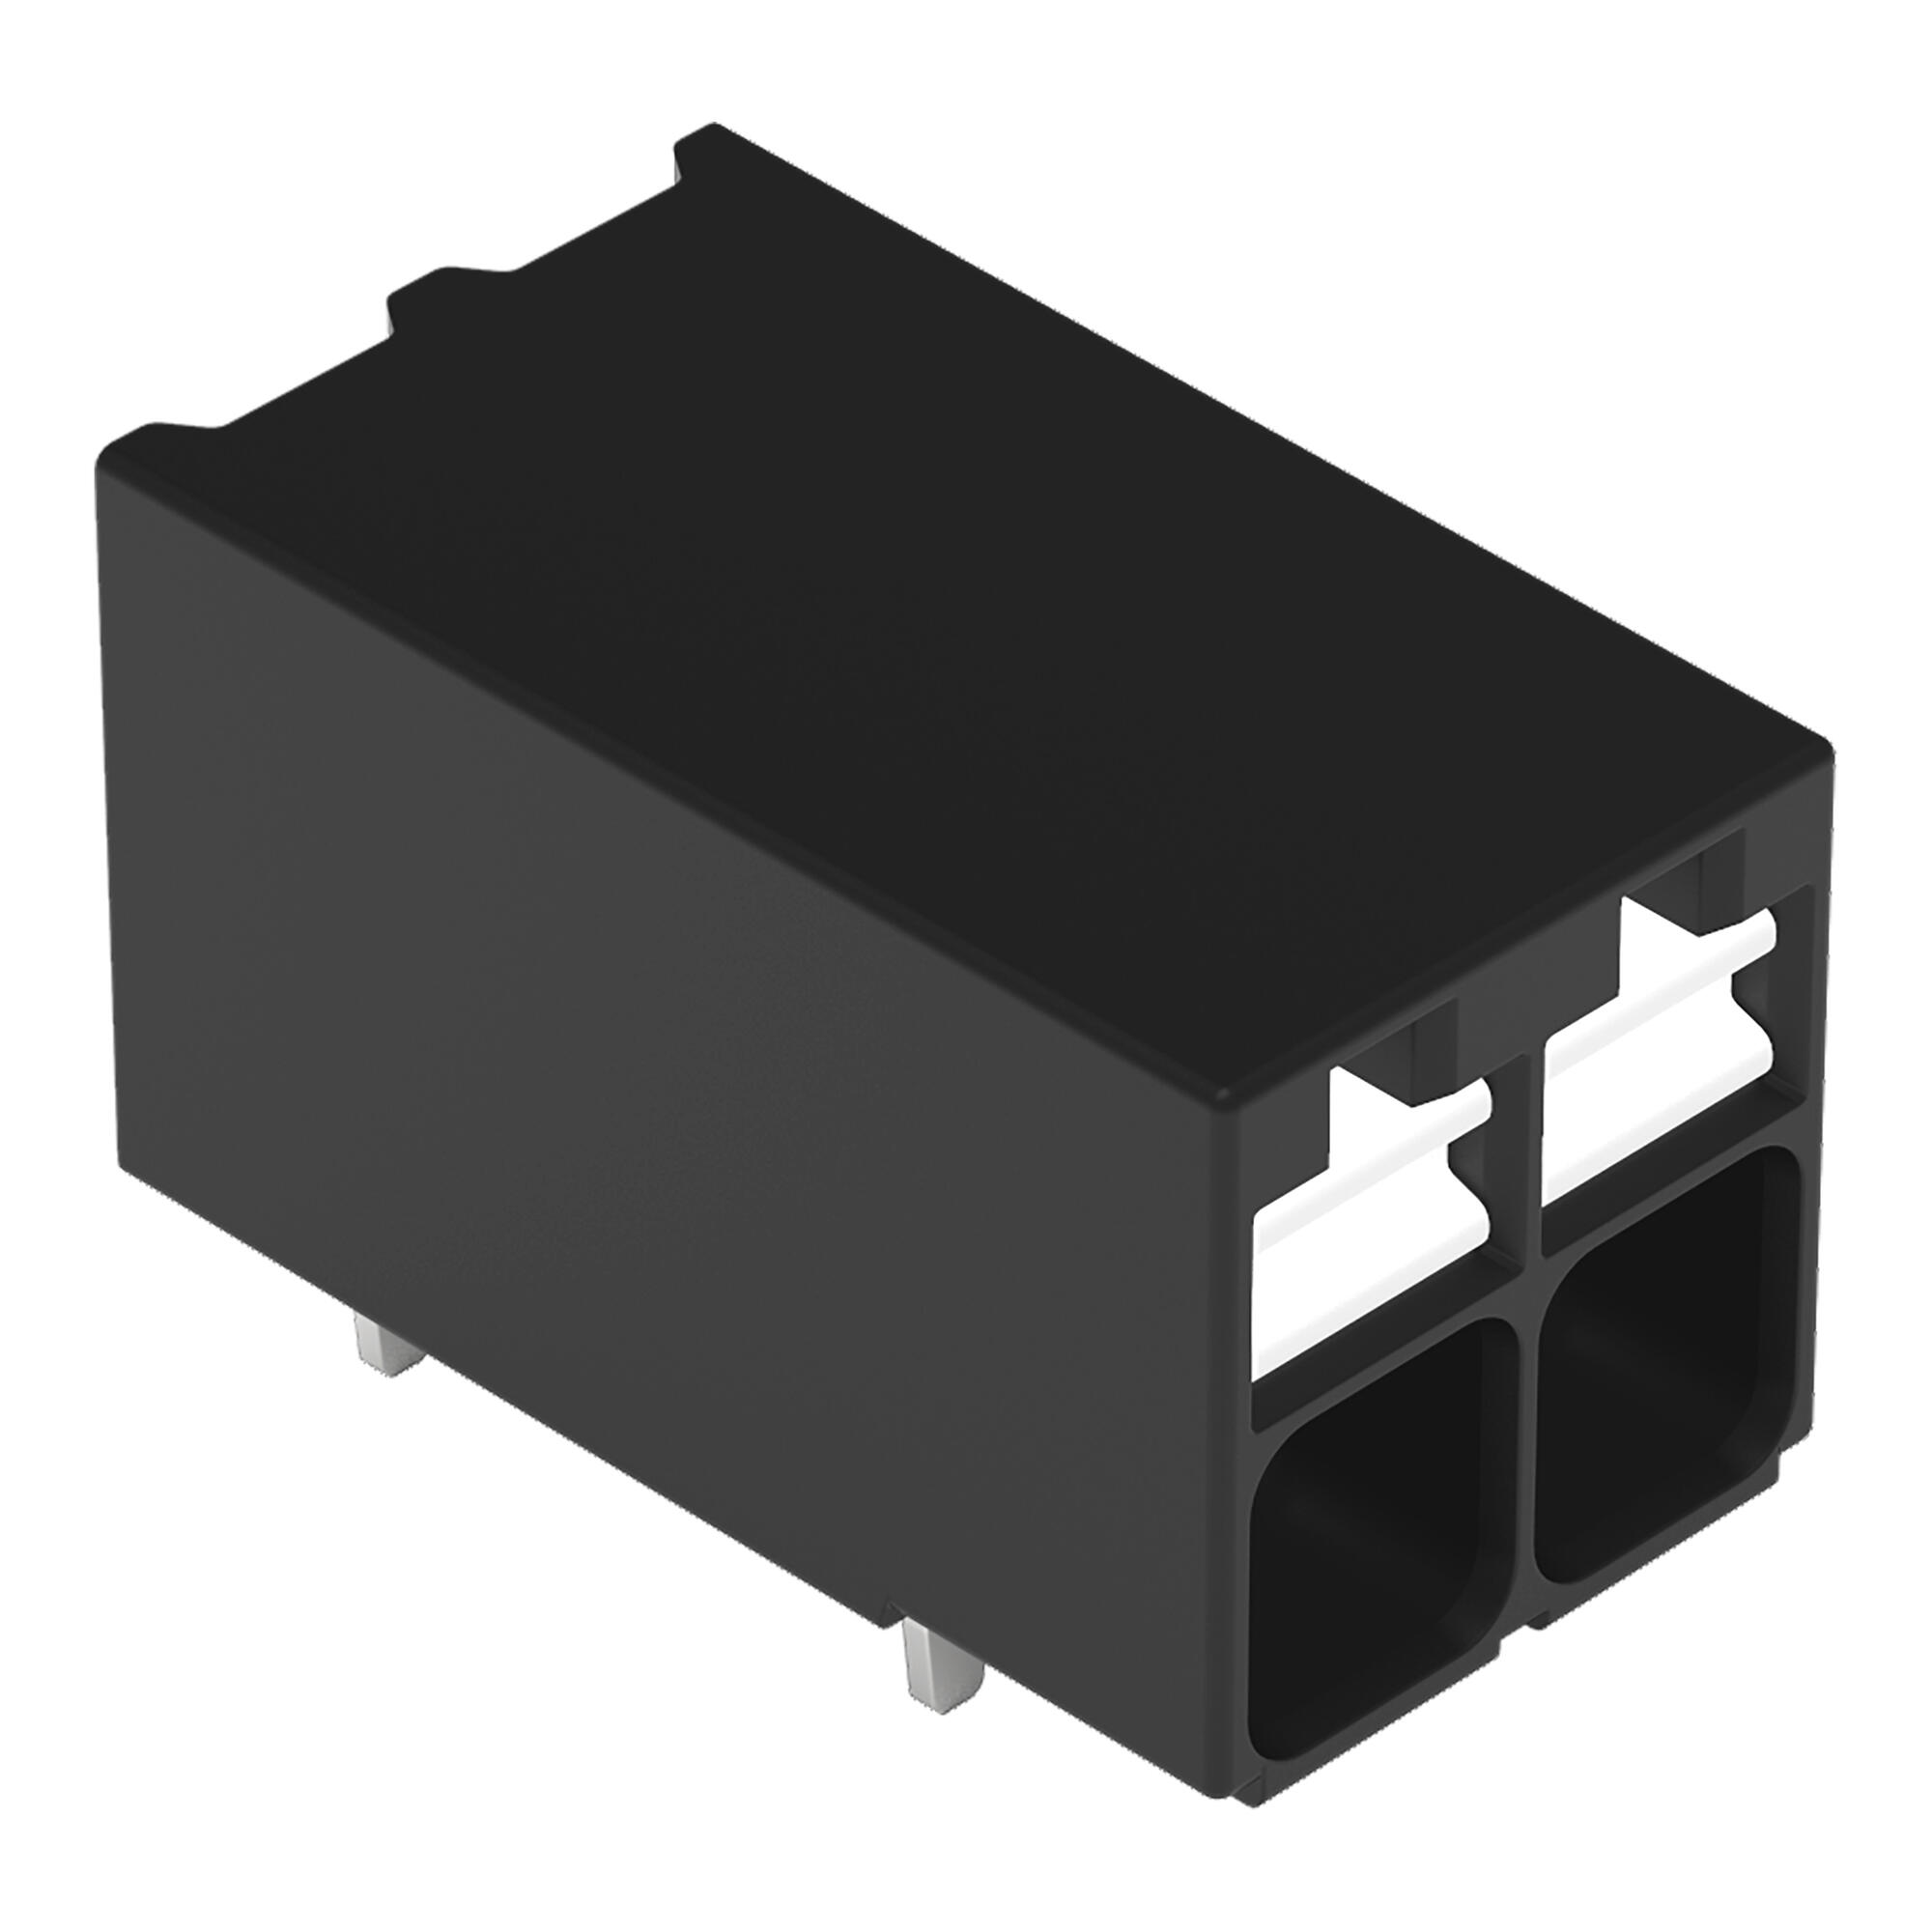 THR PCB terminal block; push-button; 1.5 mm²; Pin spacing 3.5 mm; 2-pole; Push-in CAGE CLAMP®; Solder pin length 2.4mm; black